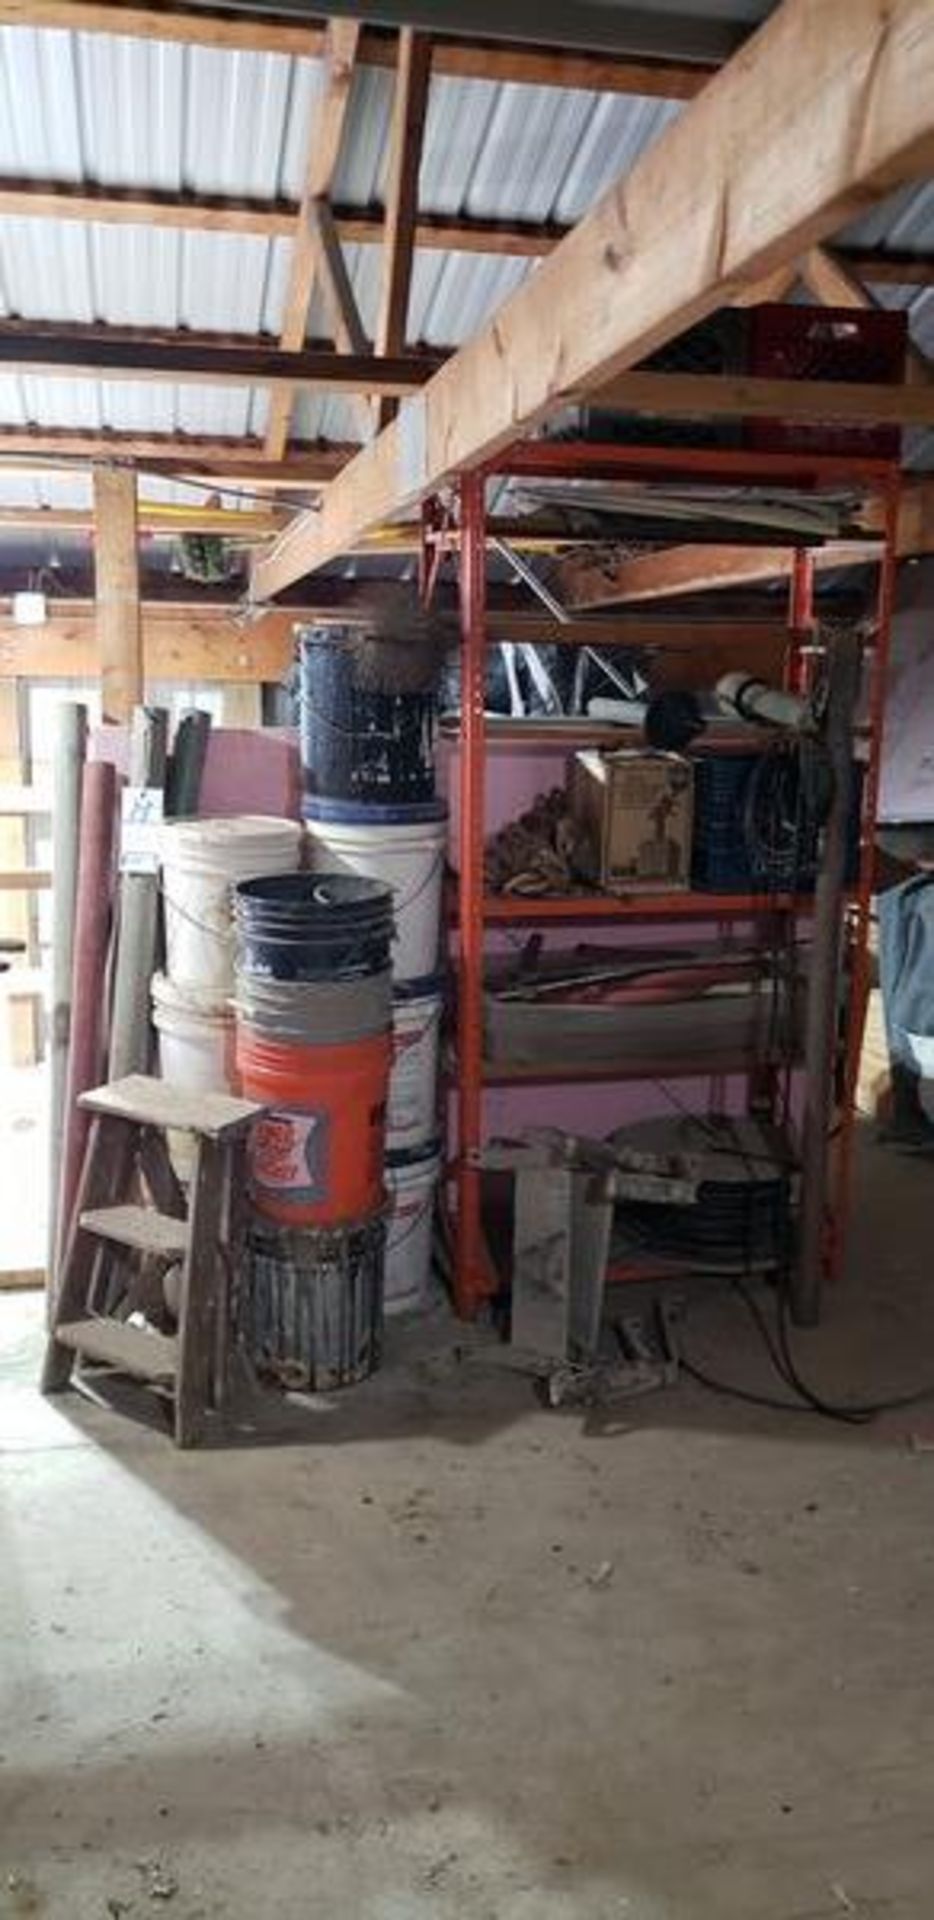 LOT OF MISC WITH BUCKETS, SHELF, ETC